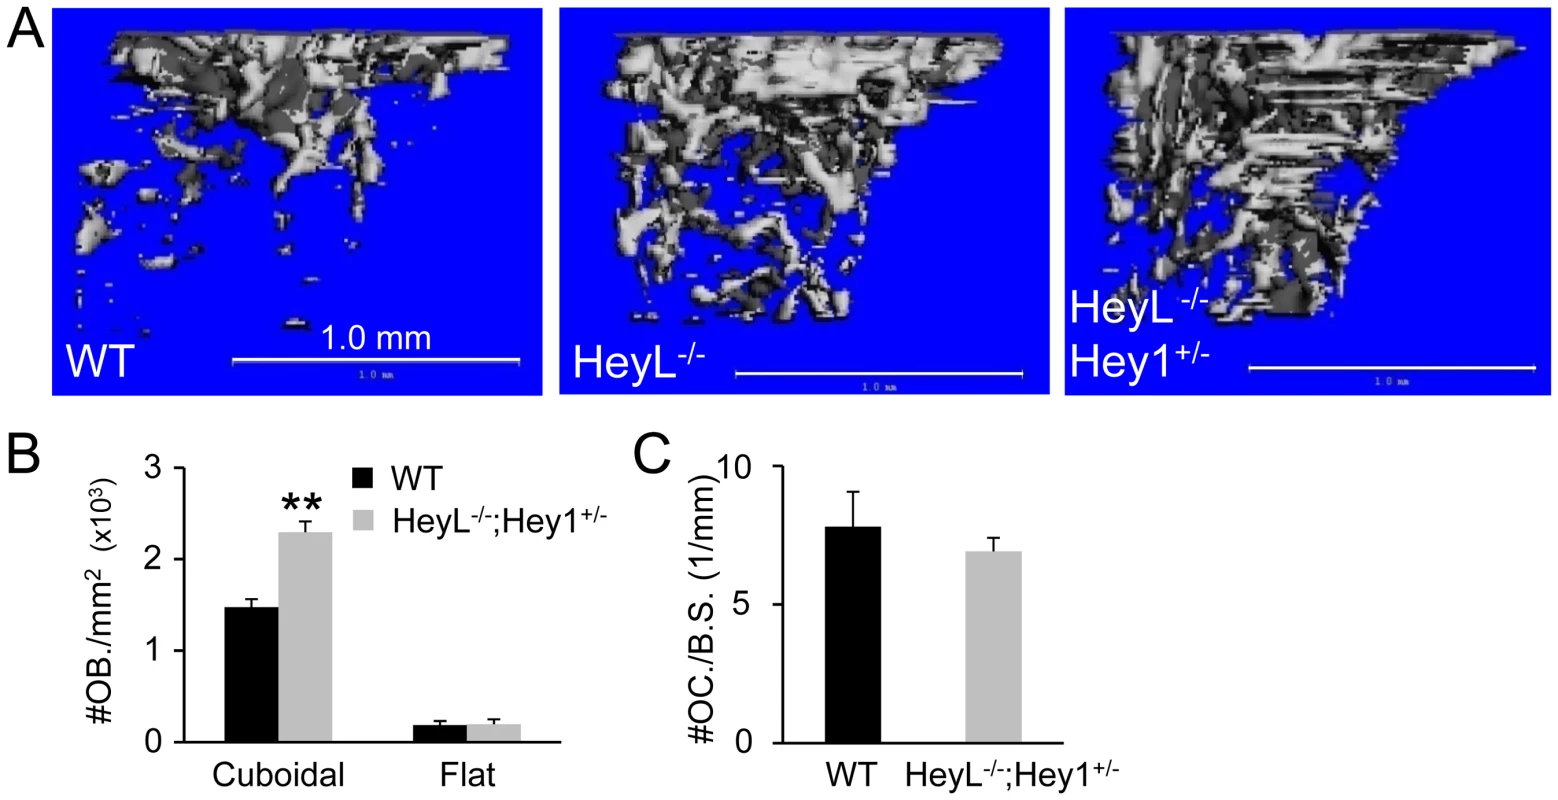 Bone phenotypes of Hey1 and HeyL mutant mice at 8 weeks of age.